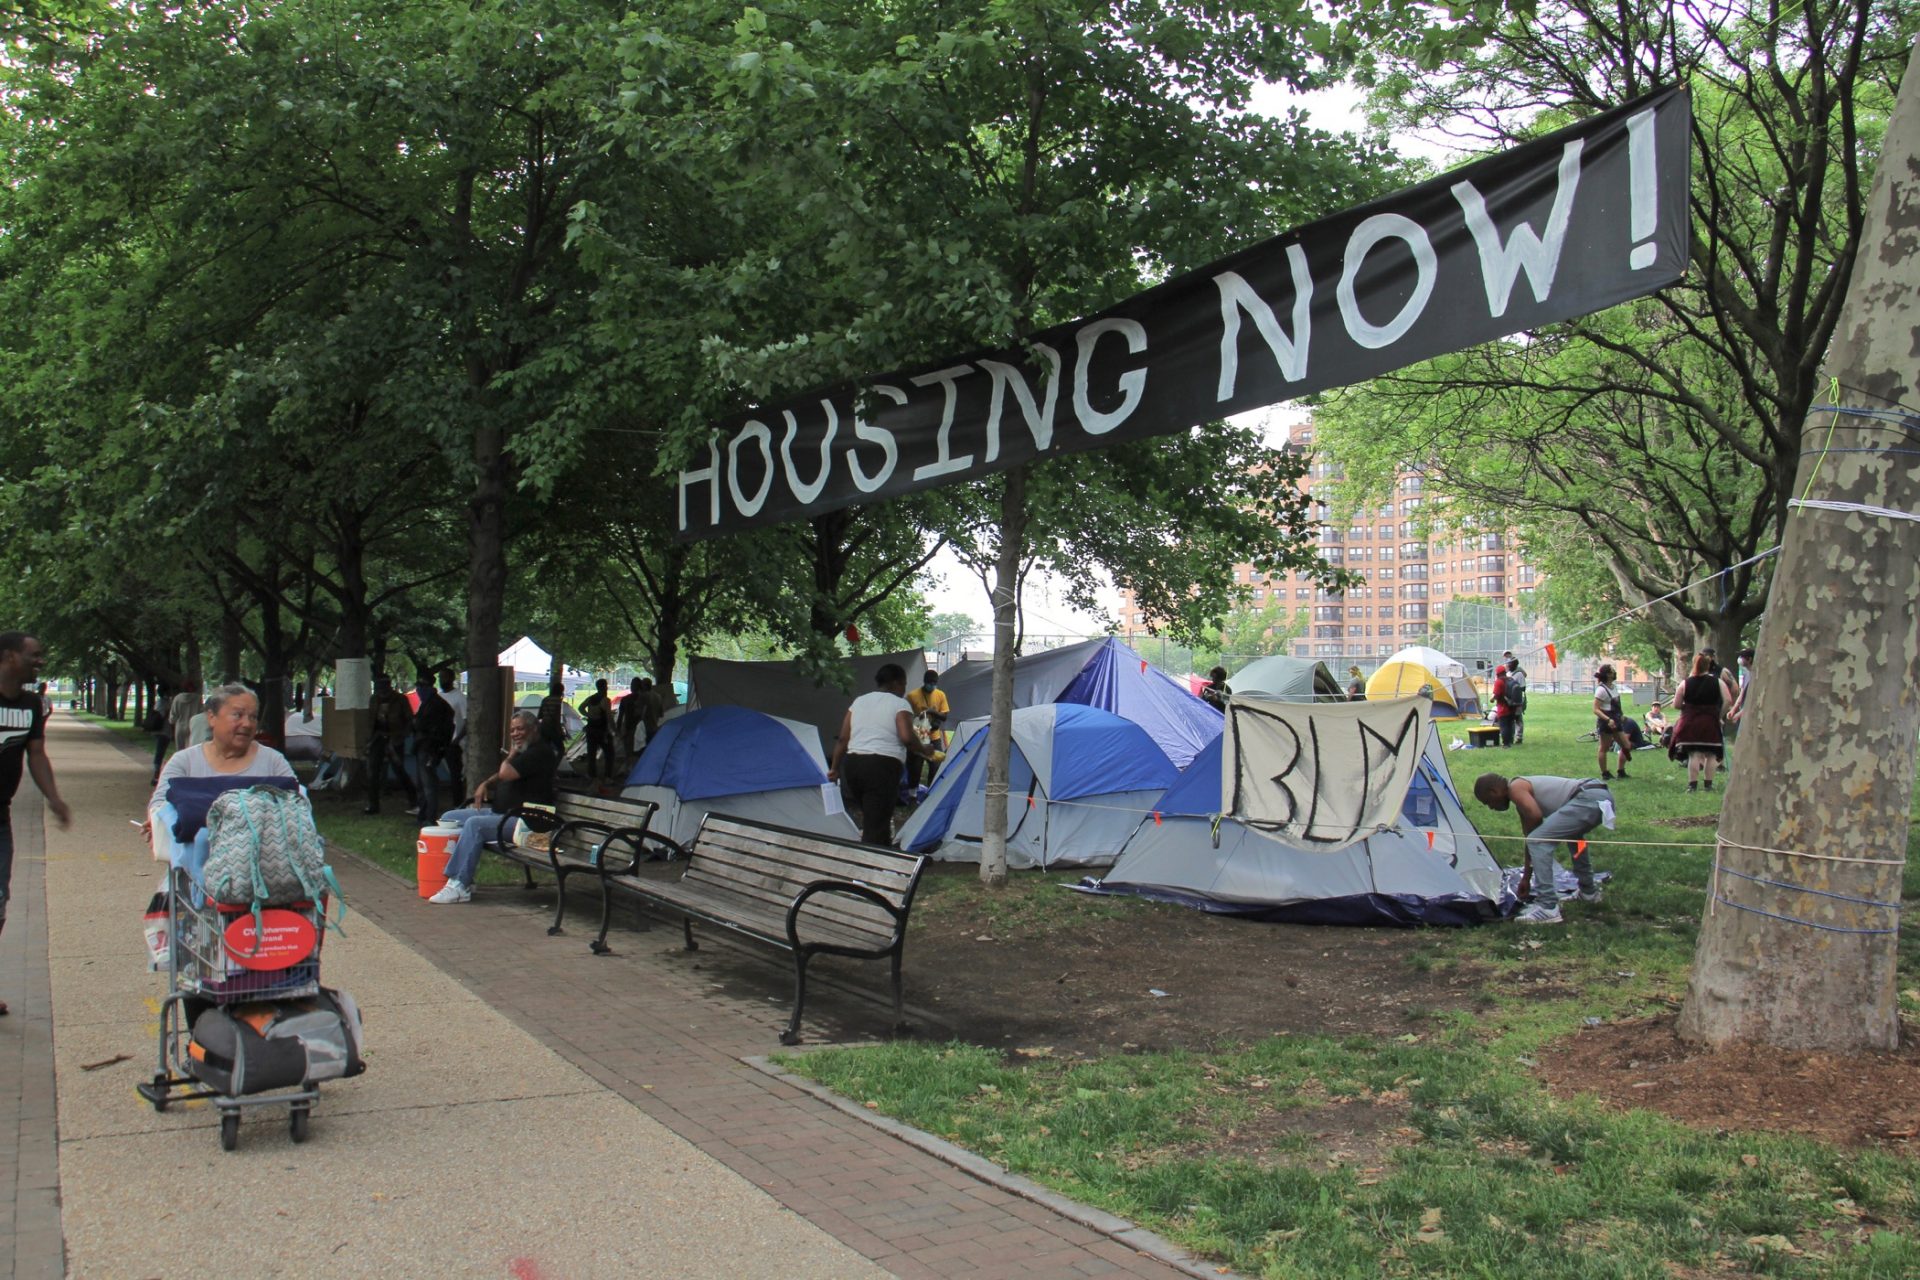 By June 11, 2020, some 40 tents had popped up on the Ben Franklin Parkway at 22nd Street, part of a protest against a law that prohibits camping on public property.